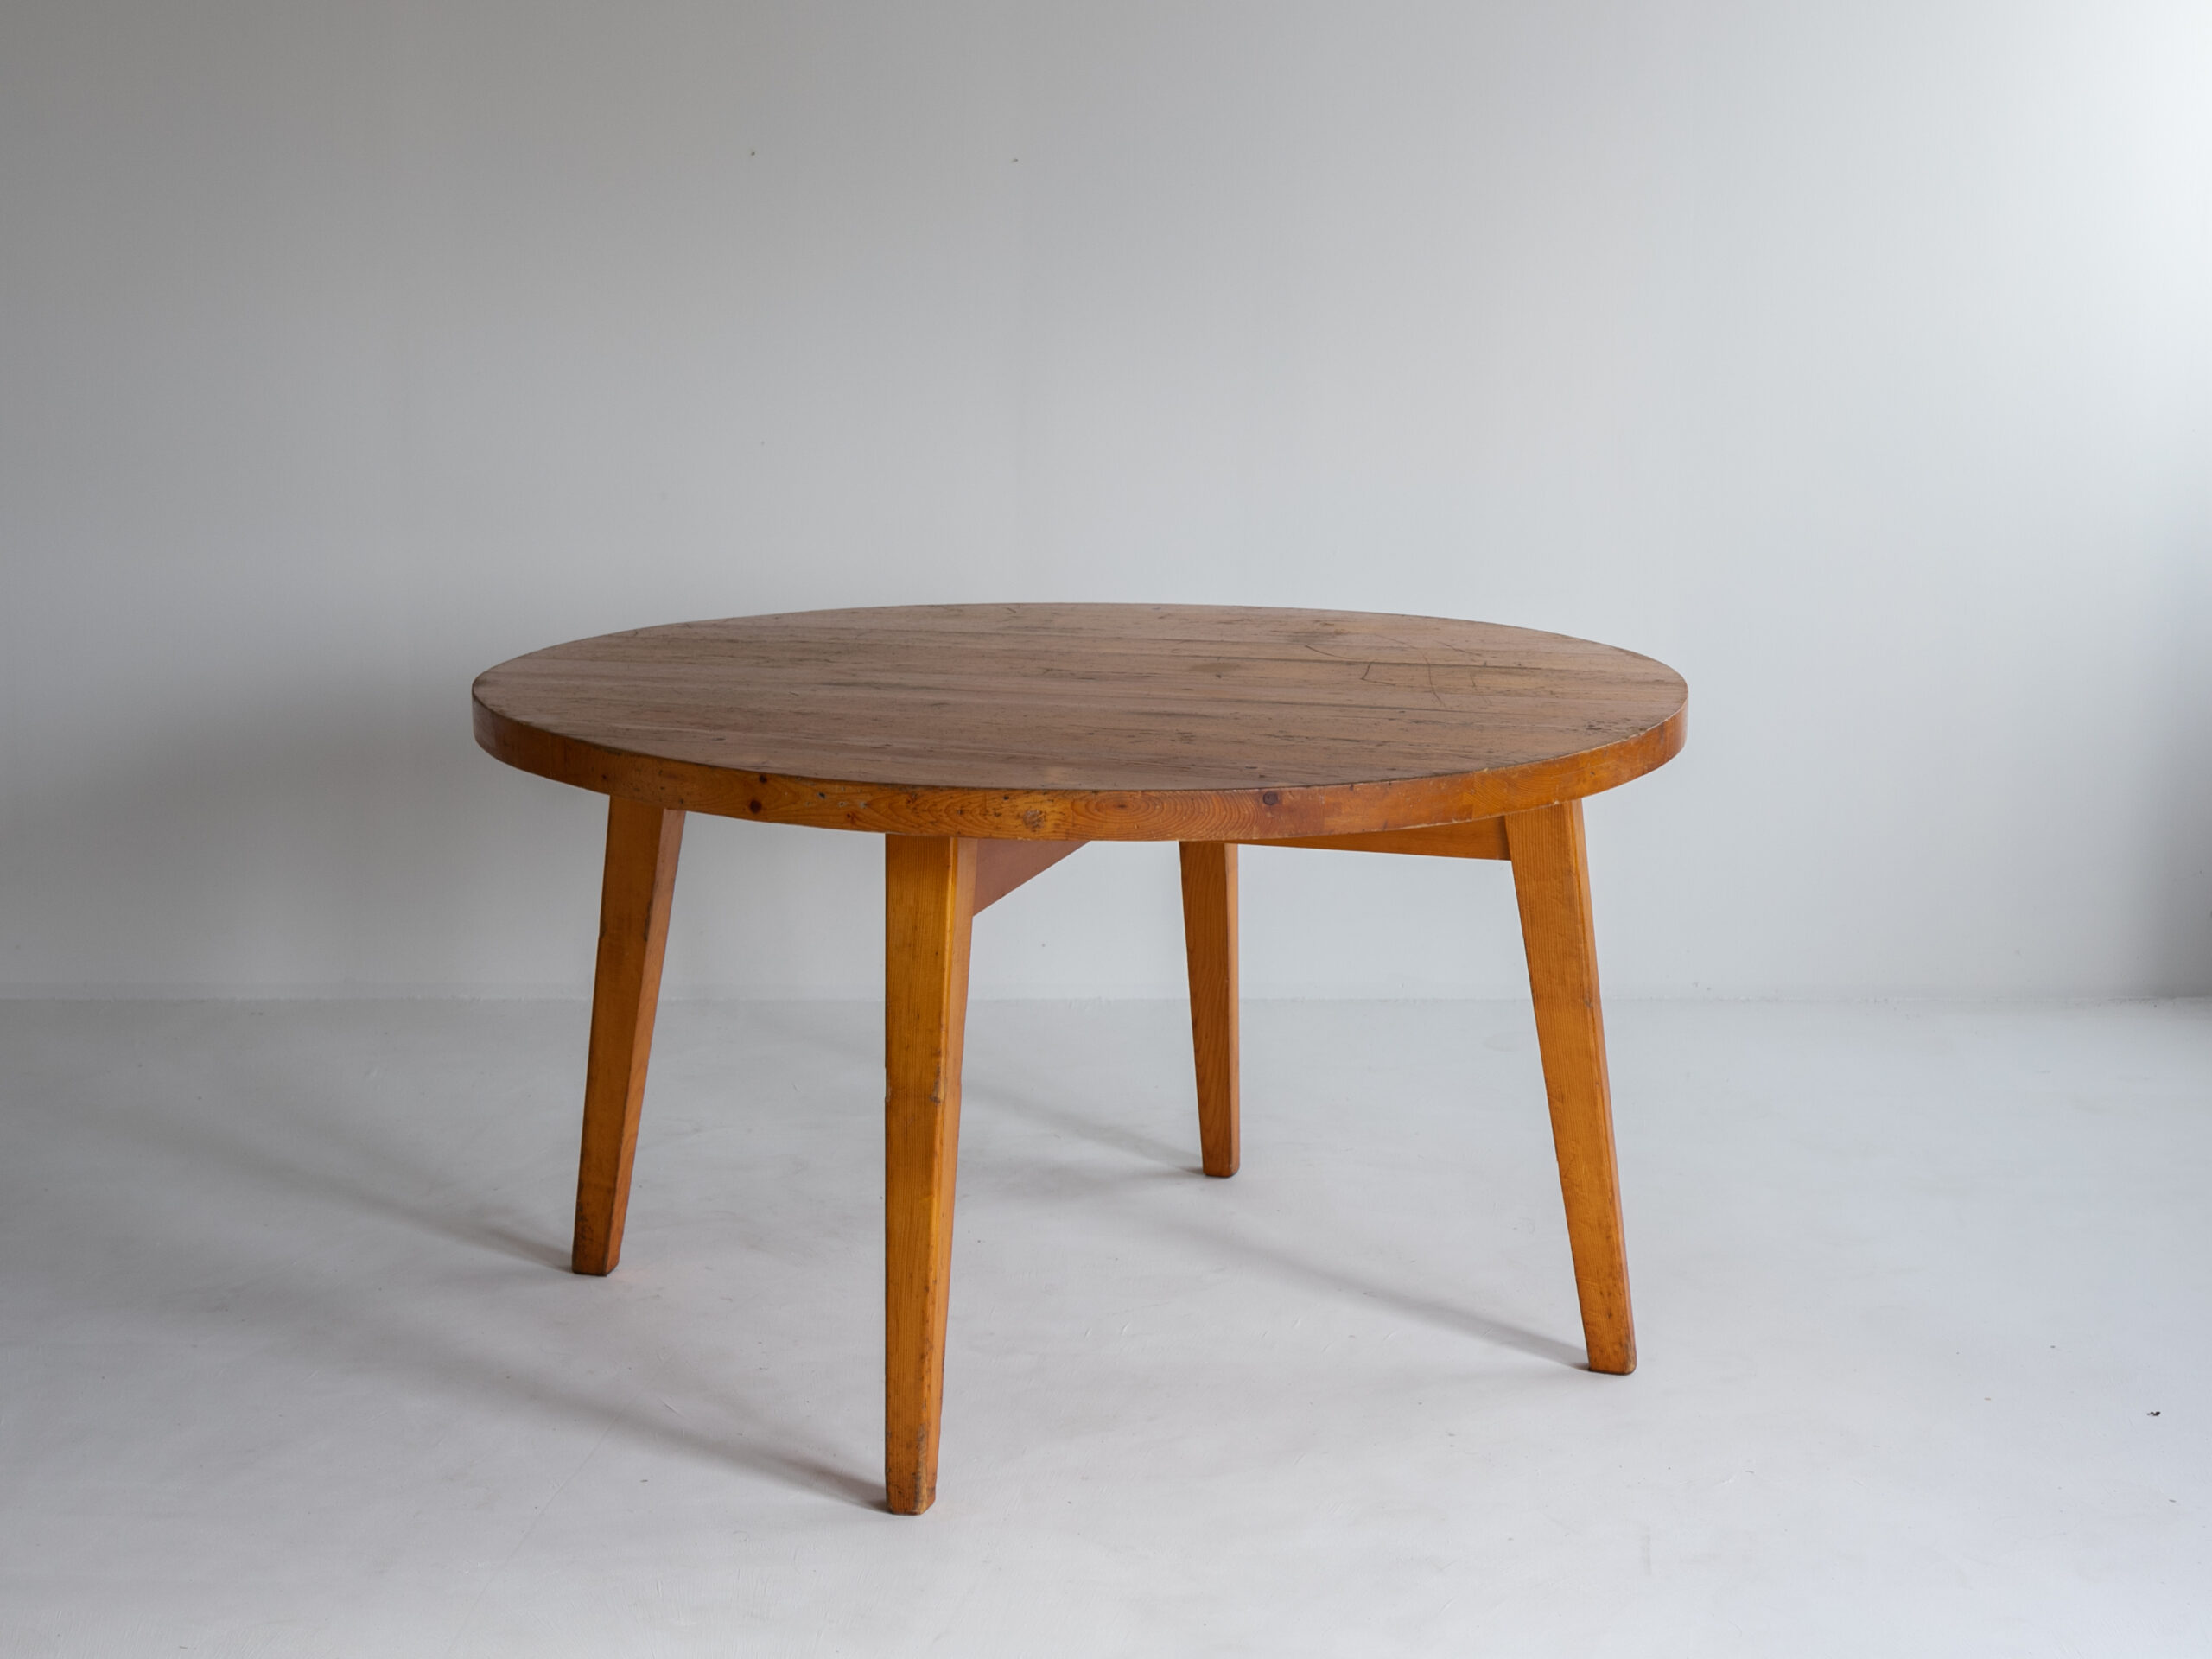 Vintage round table by Christian Durupt and Charlotte Perriand, 1968